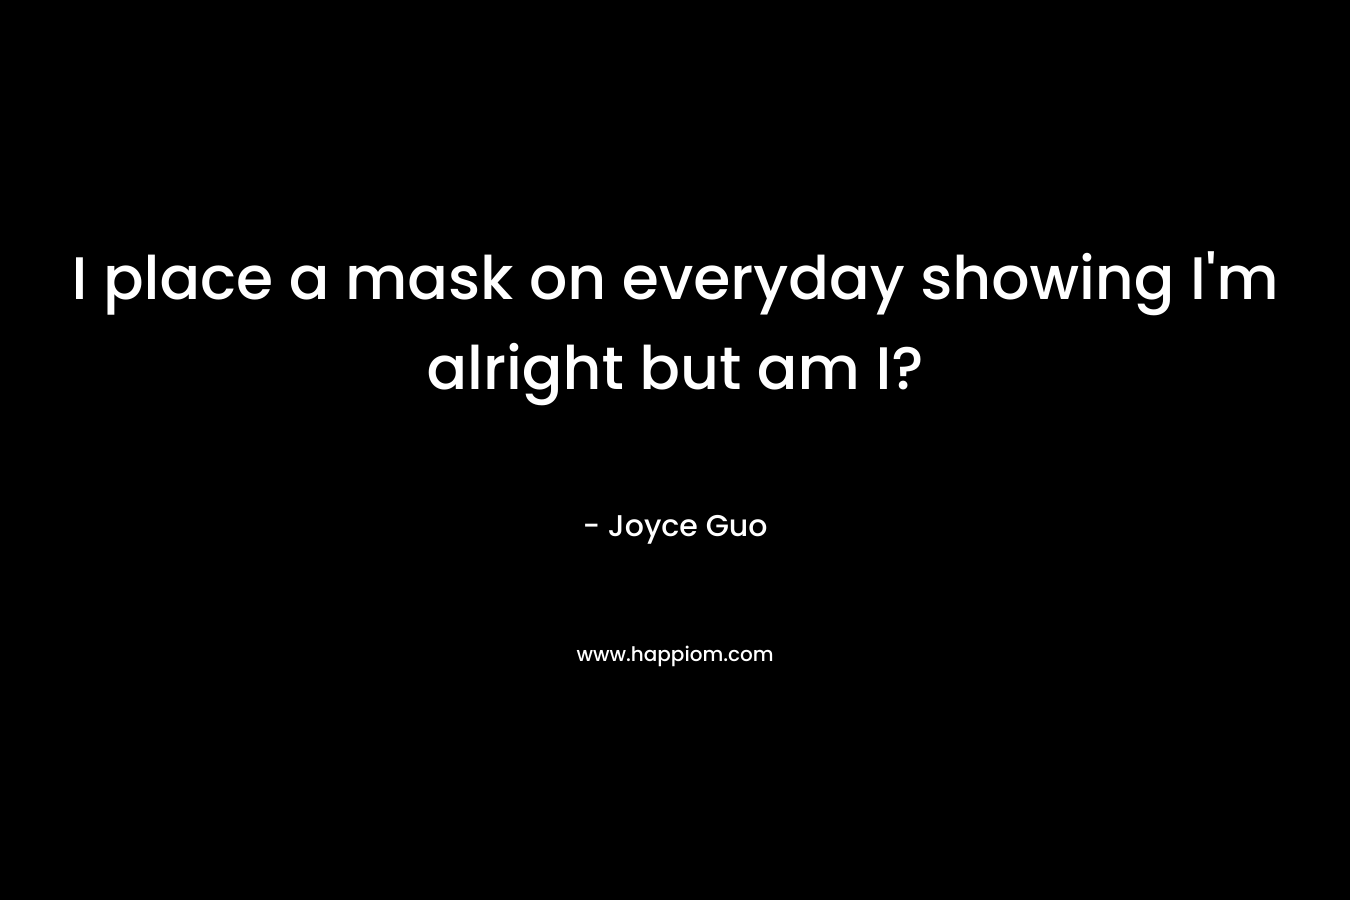 I place a mask on everyday showing I’m alright but am I? – Joyce Guo